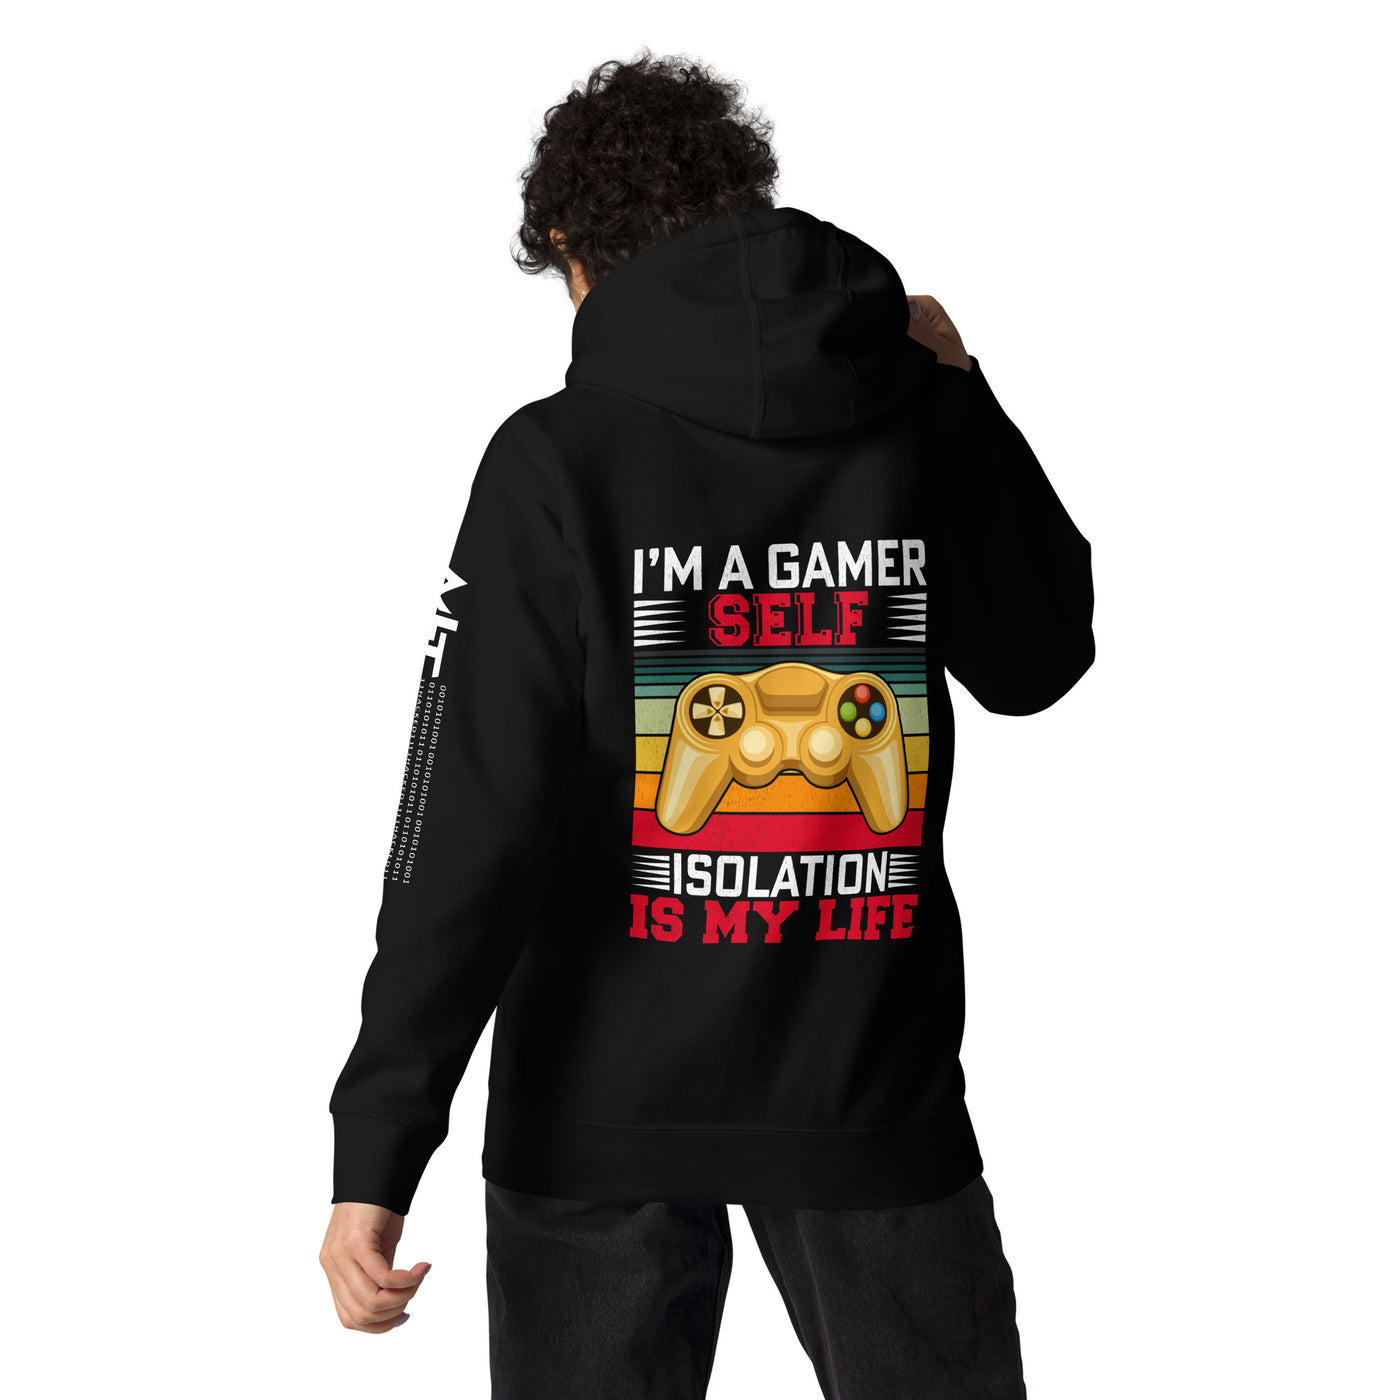 I am a Gamer; Self-isolation is my life - Unisex Hoodie ( Back Print )